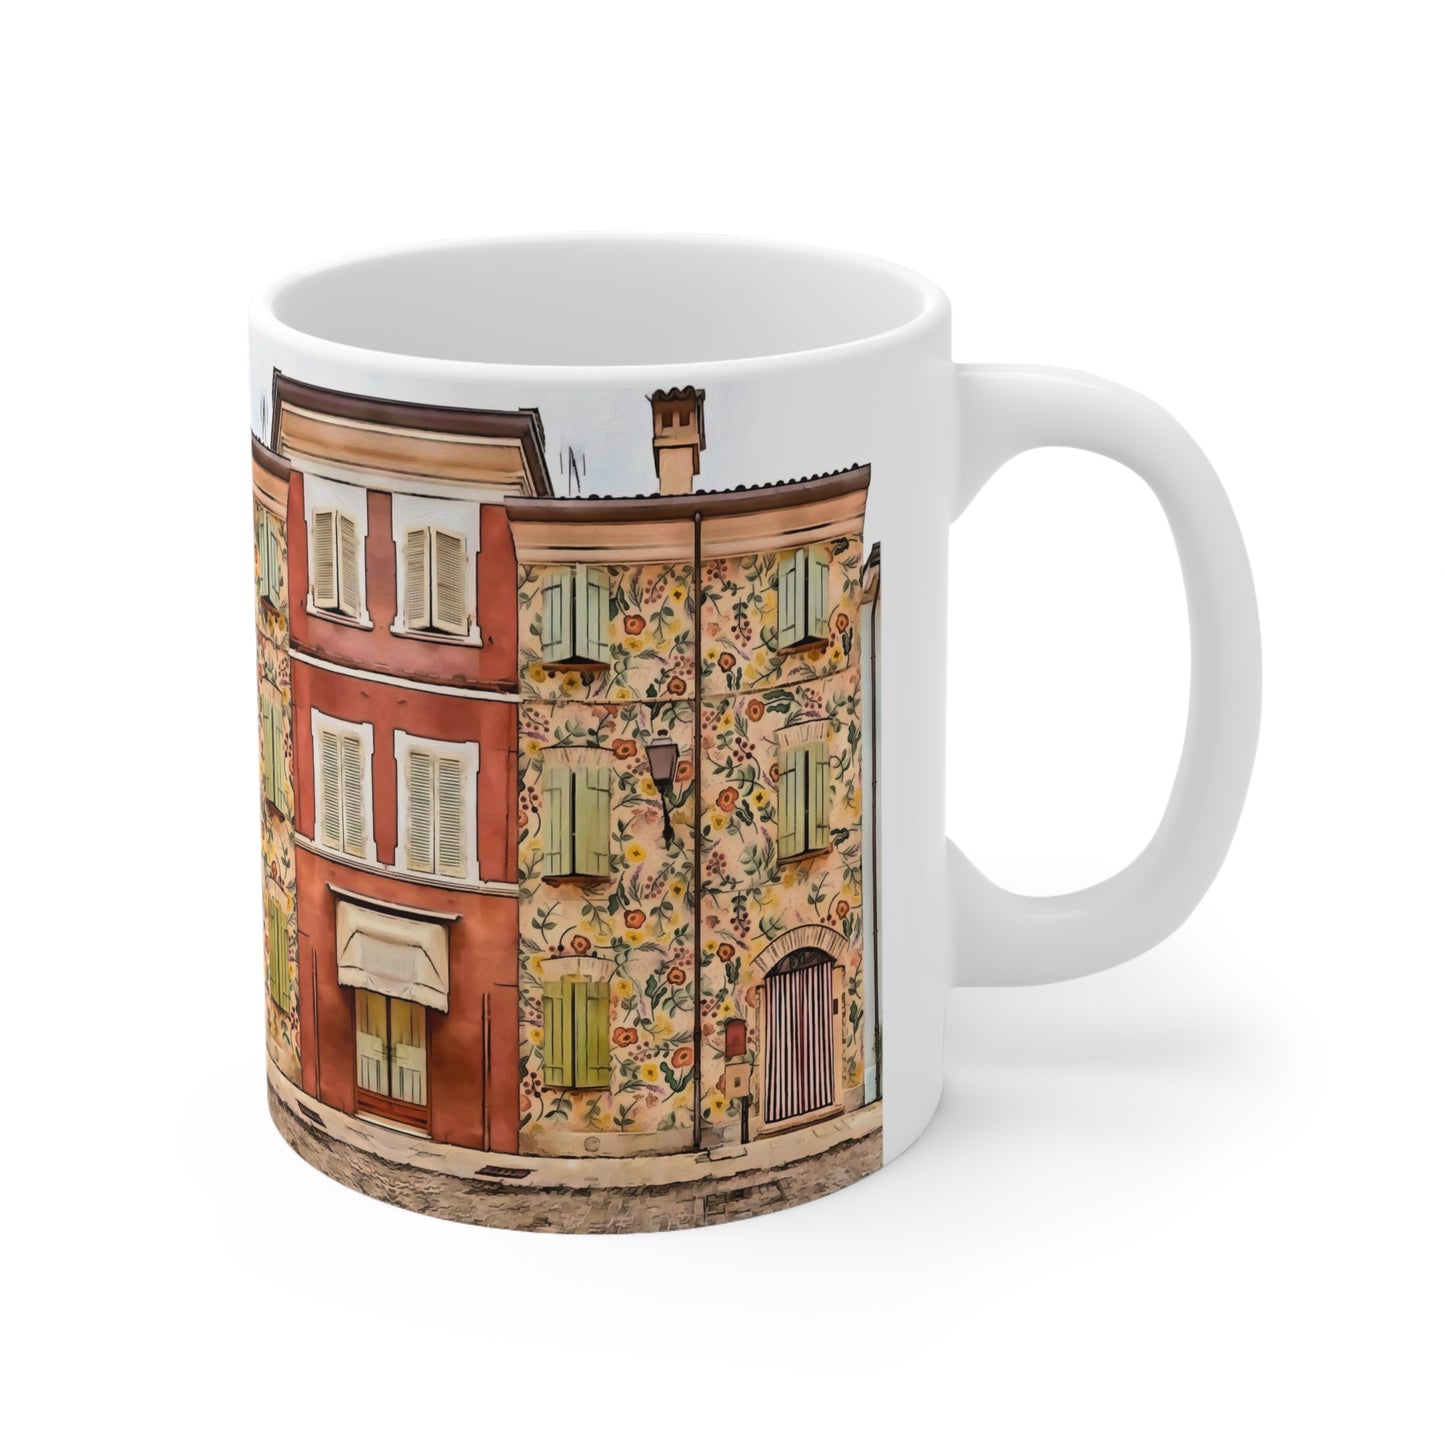 Italy Floral Painted Homes Cottage Core Style White Ceramic Coffee Mug 11oz